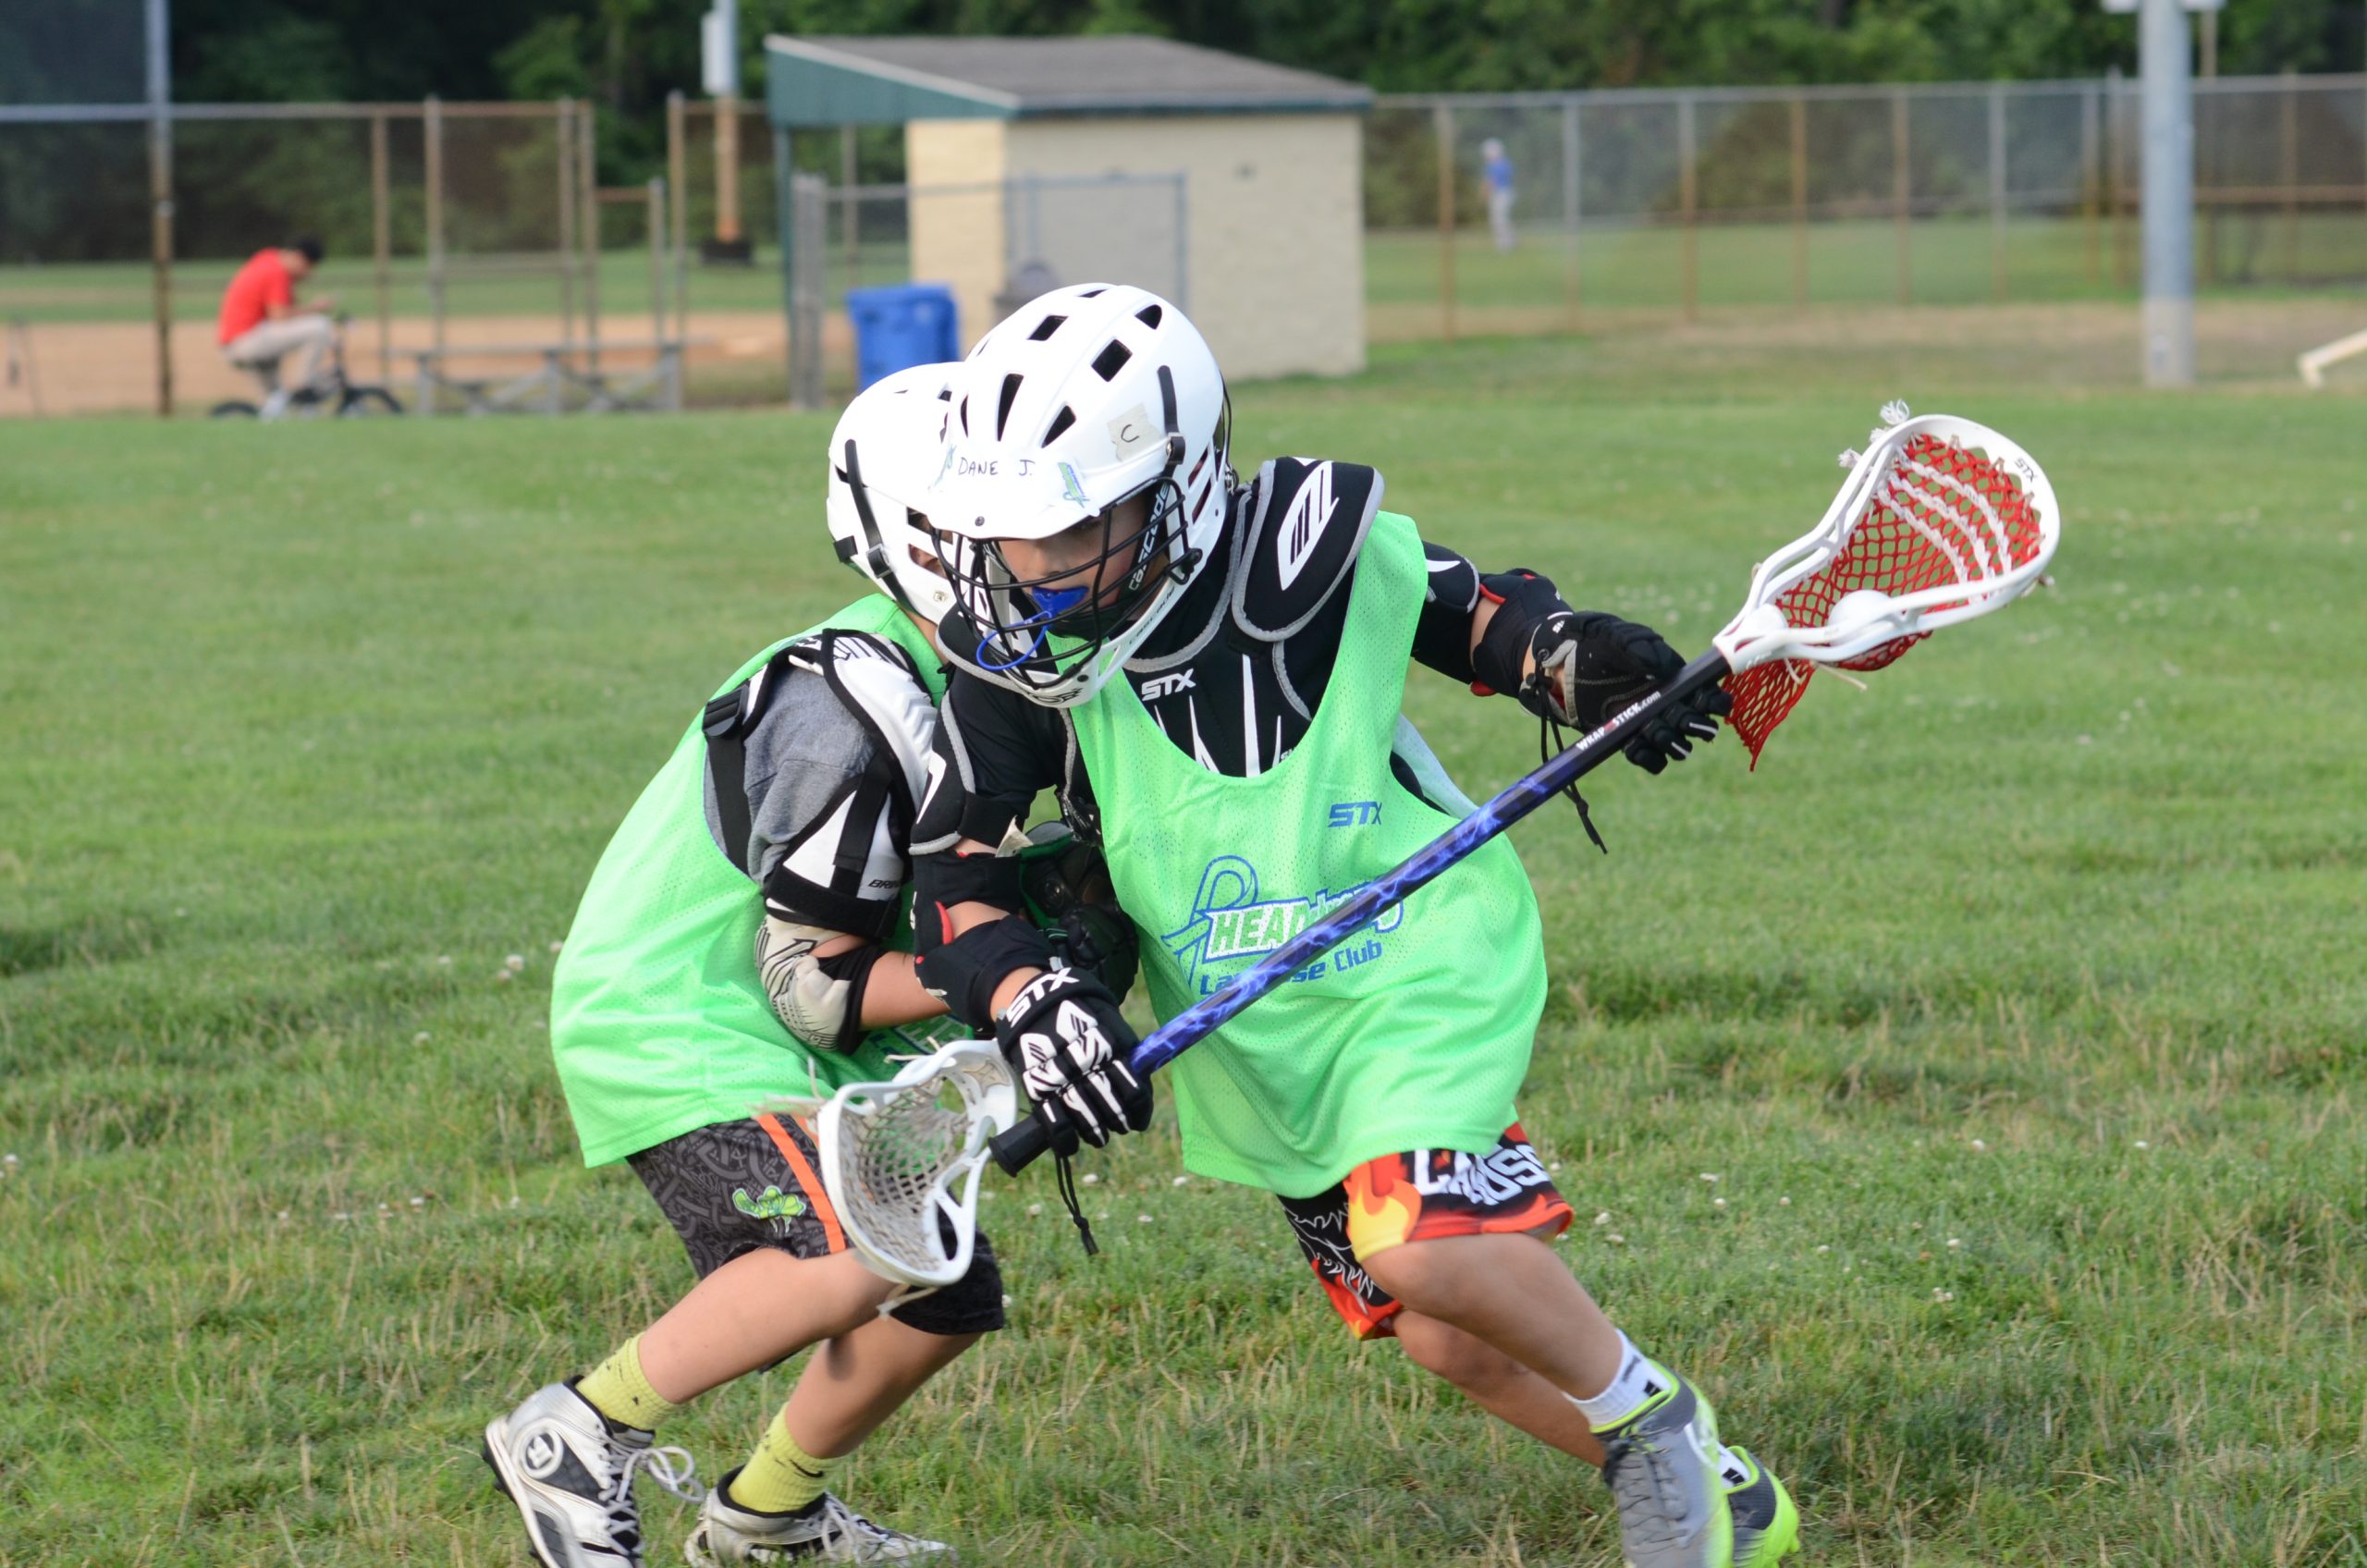 HEADstrong Announces 2017 Summer Lacrosse Camp Series Supporting Families Affected By Cancer